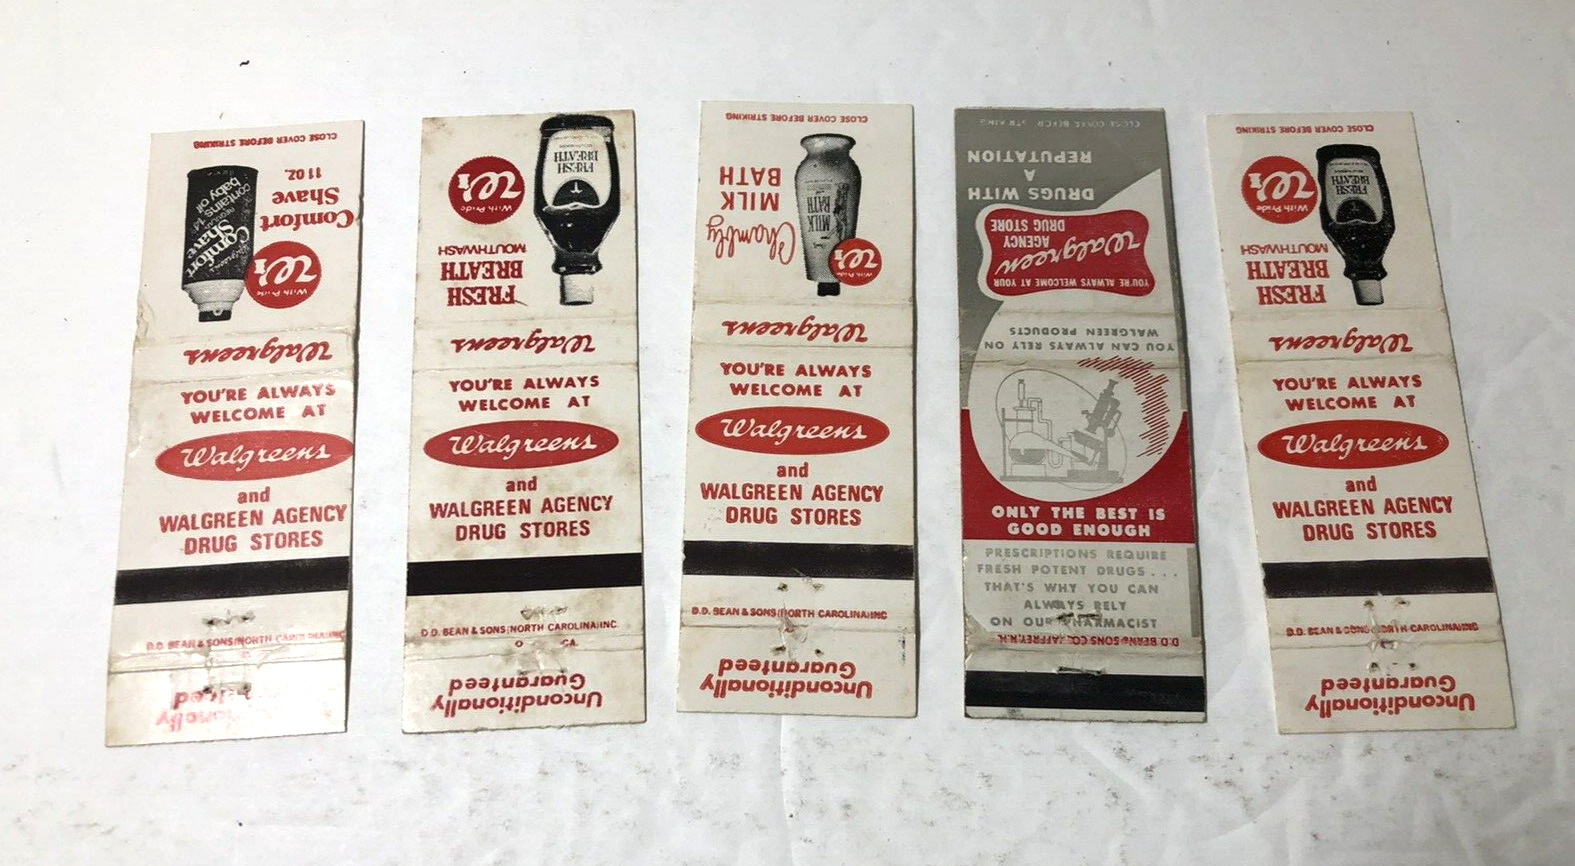 Lot of 5 Vintage Walgreens Matchbook covers - Advertisements - No Matches